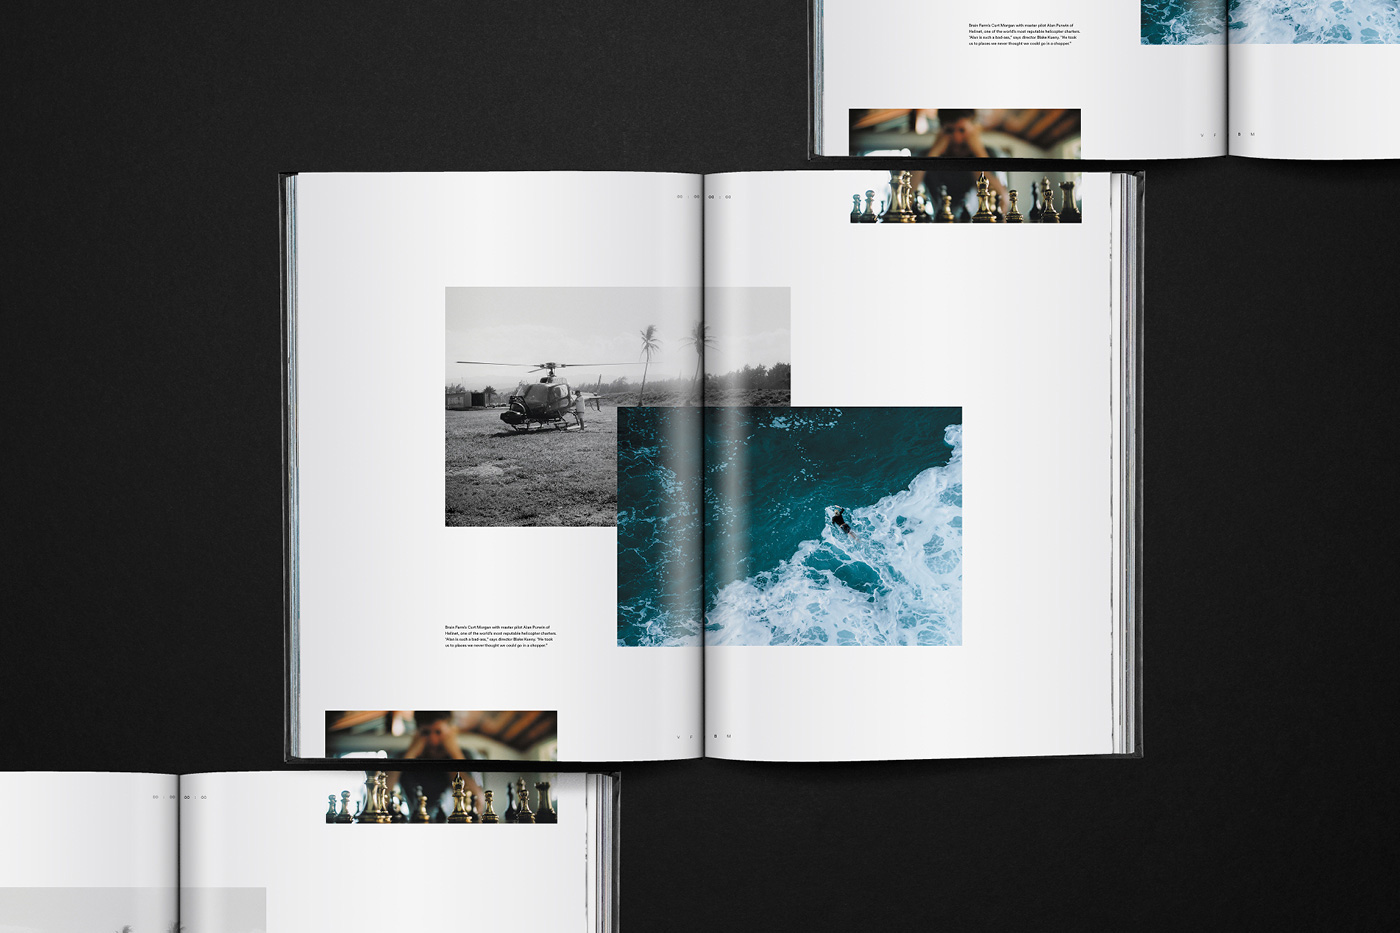 Wedge and Lever book View From ABlue moon print surfing John Florence black on black limited edition Surf VFABM books premium minimal